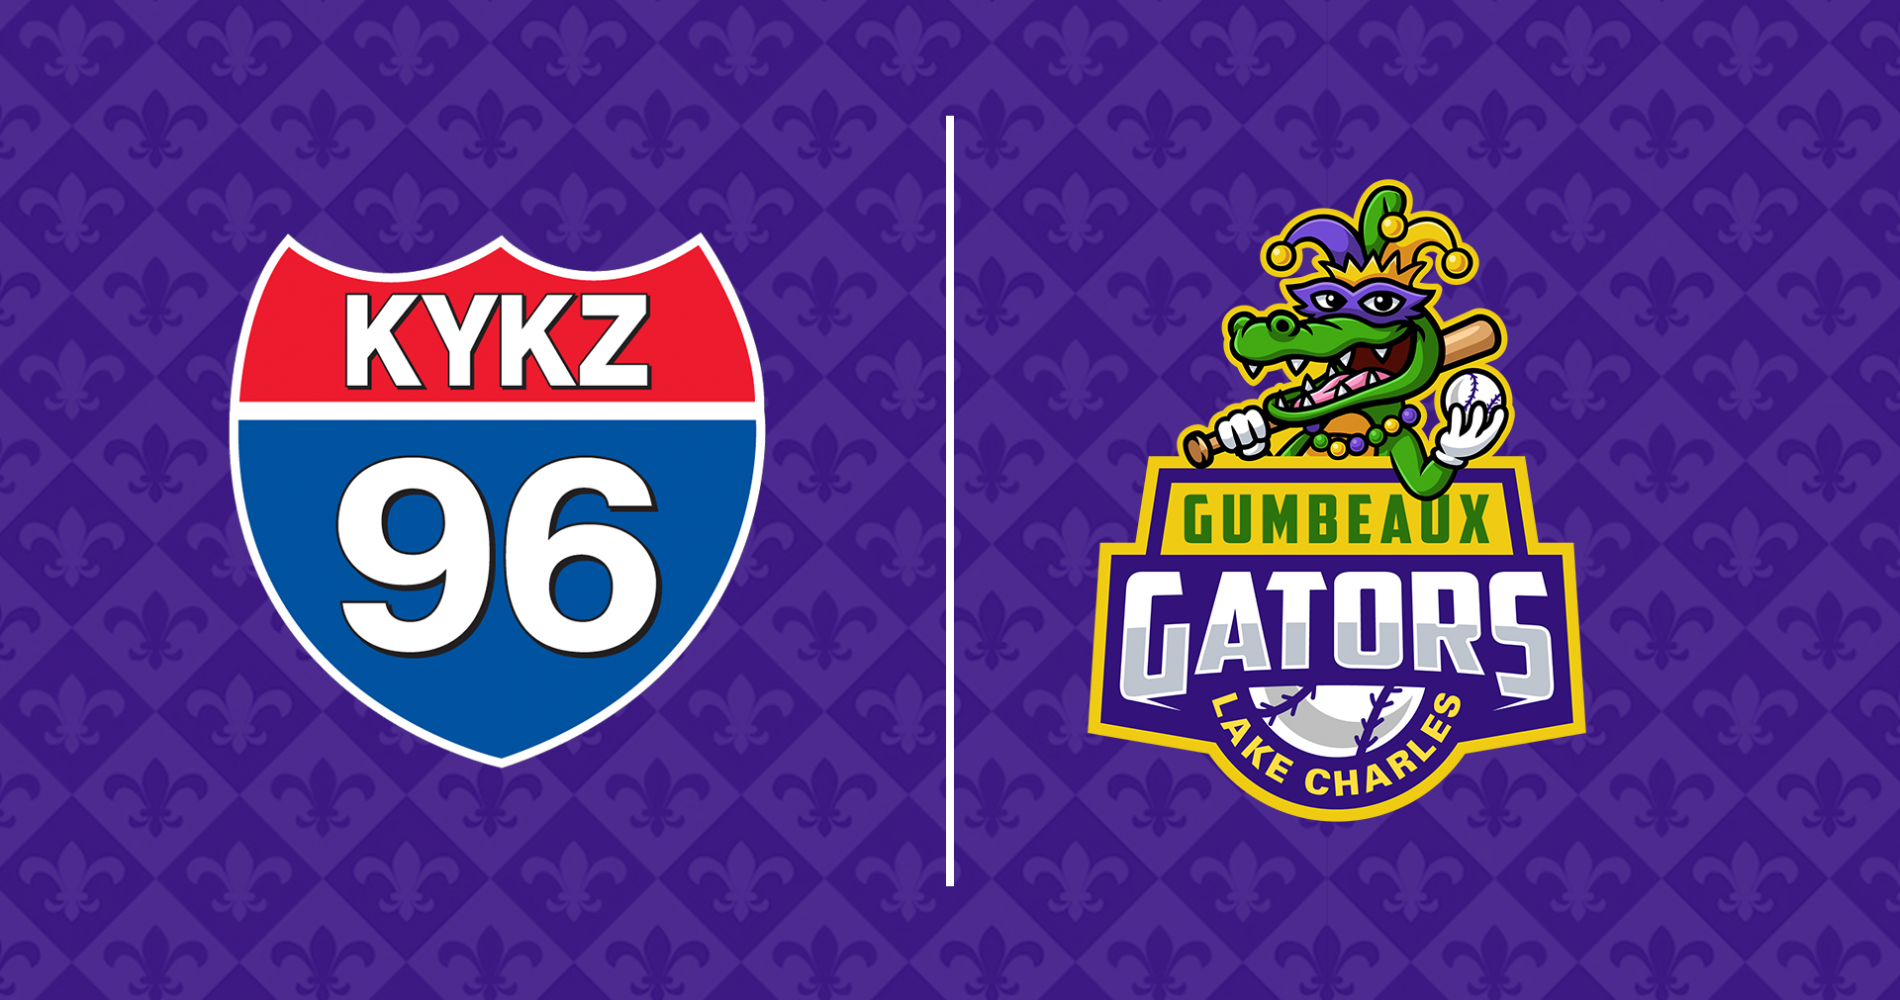 Gumbeaux Gators set to be featured Tuesday morning on KYKZ 96.1